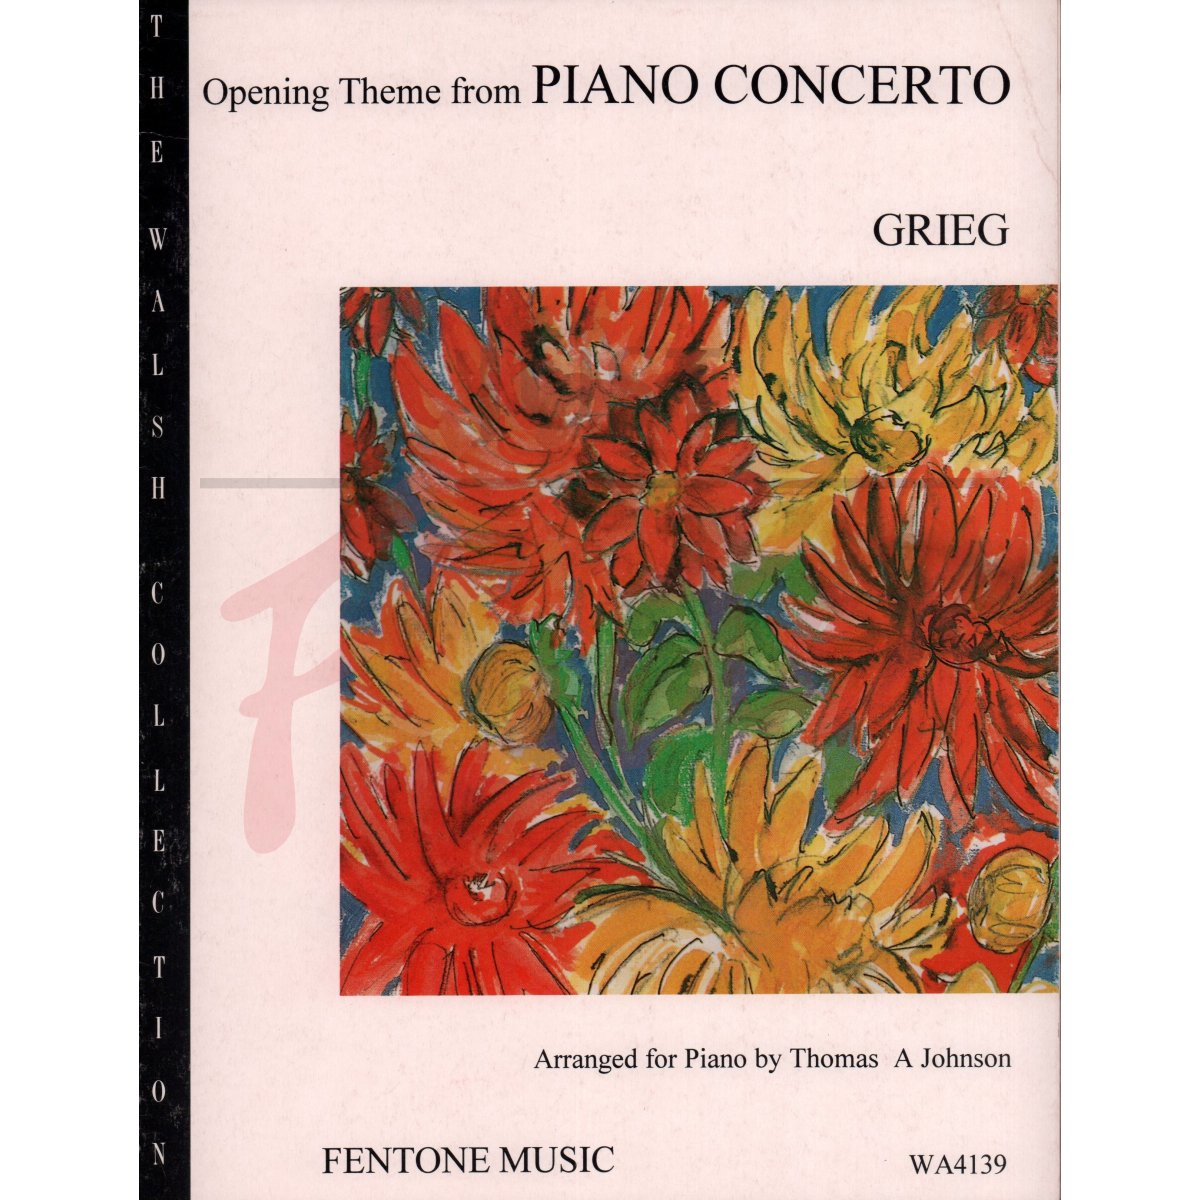 Opening Theme from Piano Concerto